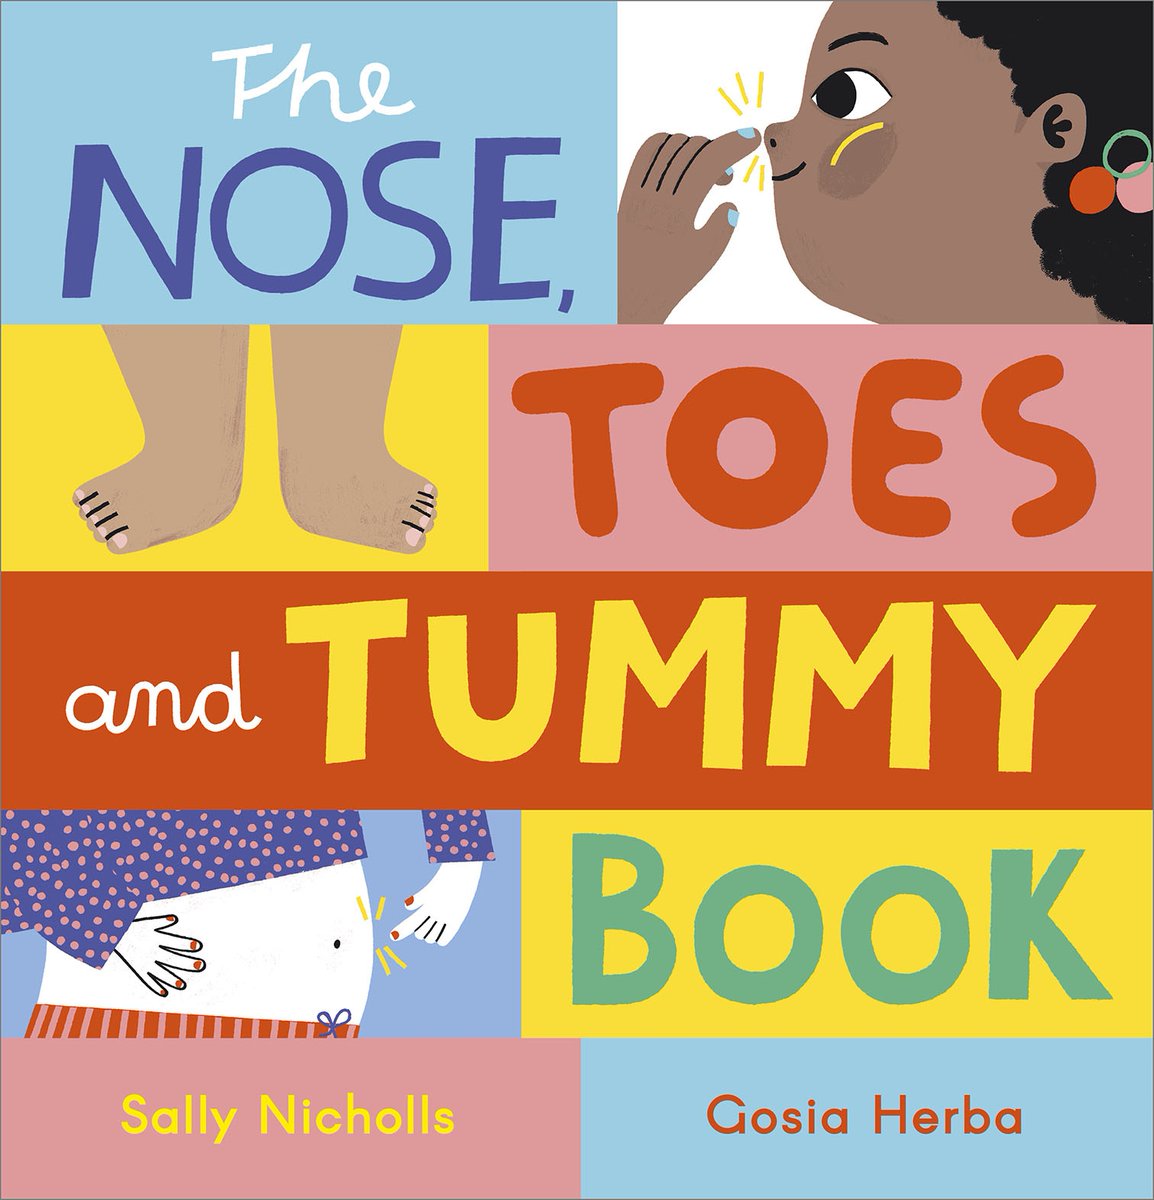 'Written with gentle humour and much warmth, this is infused with love... a lovely bedtime book' @Booktrust The wonderfully interactive and beautifully illustrated THE NOSE, TOES AND TUMMY BOOK by @Sally_Nicholls and @GosiaHerba is out today in paperback!